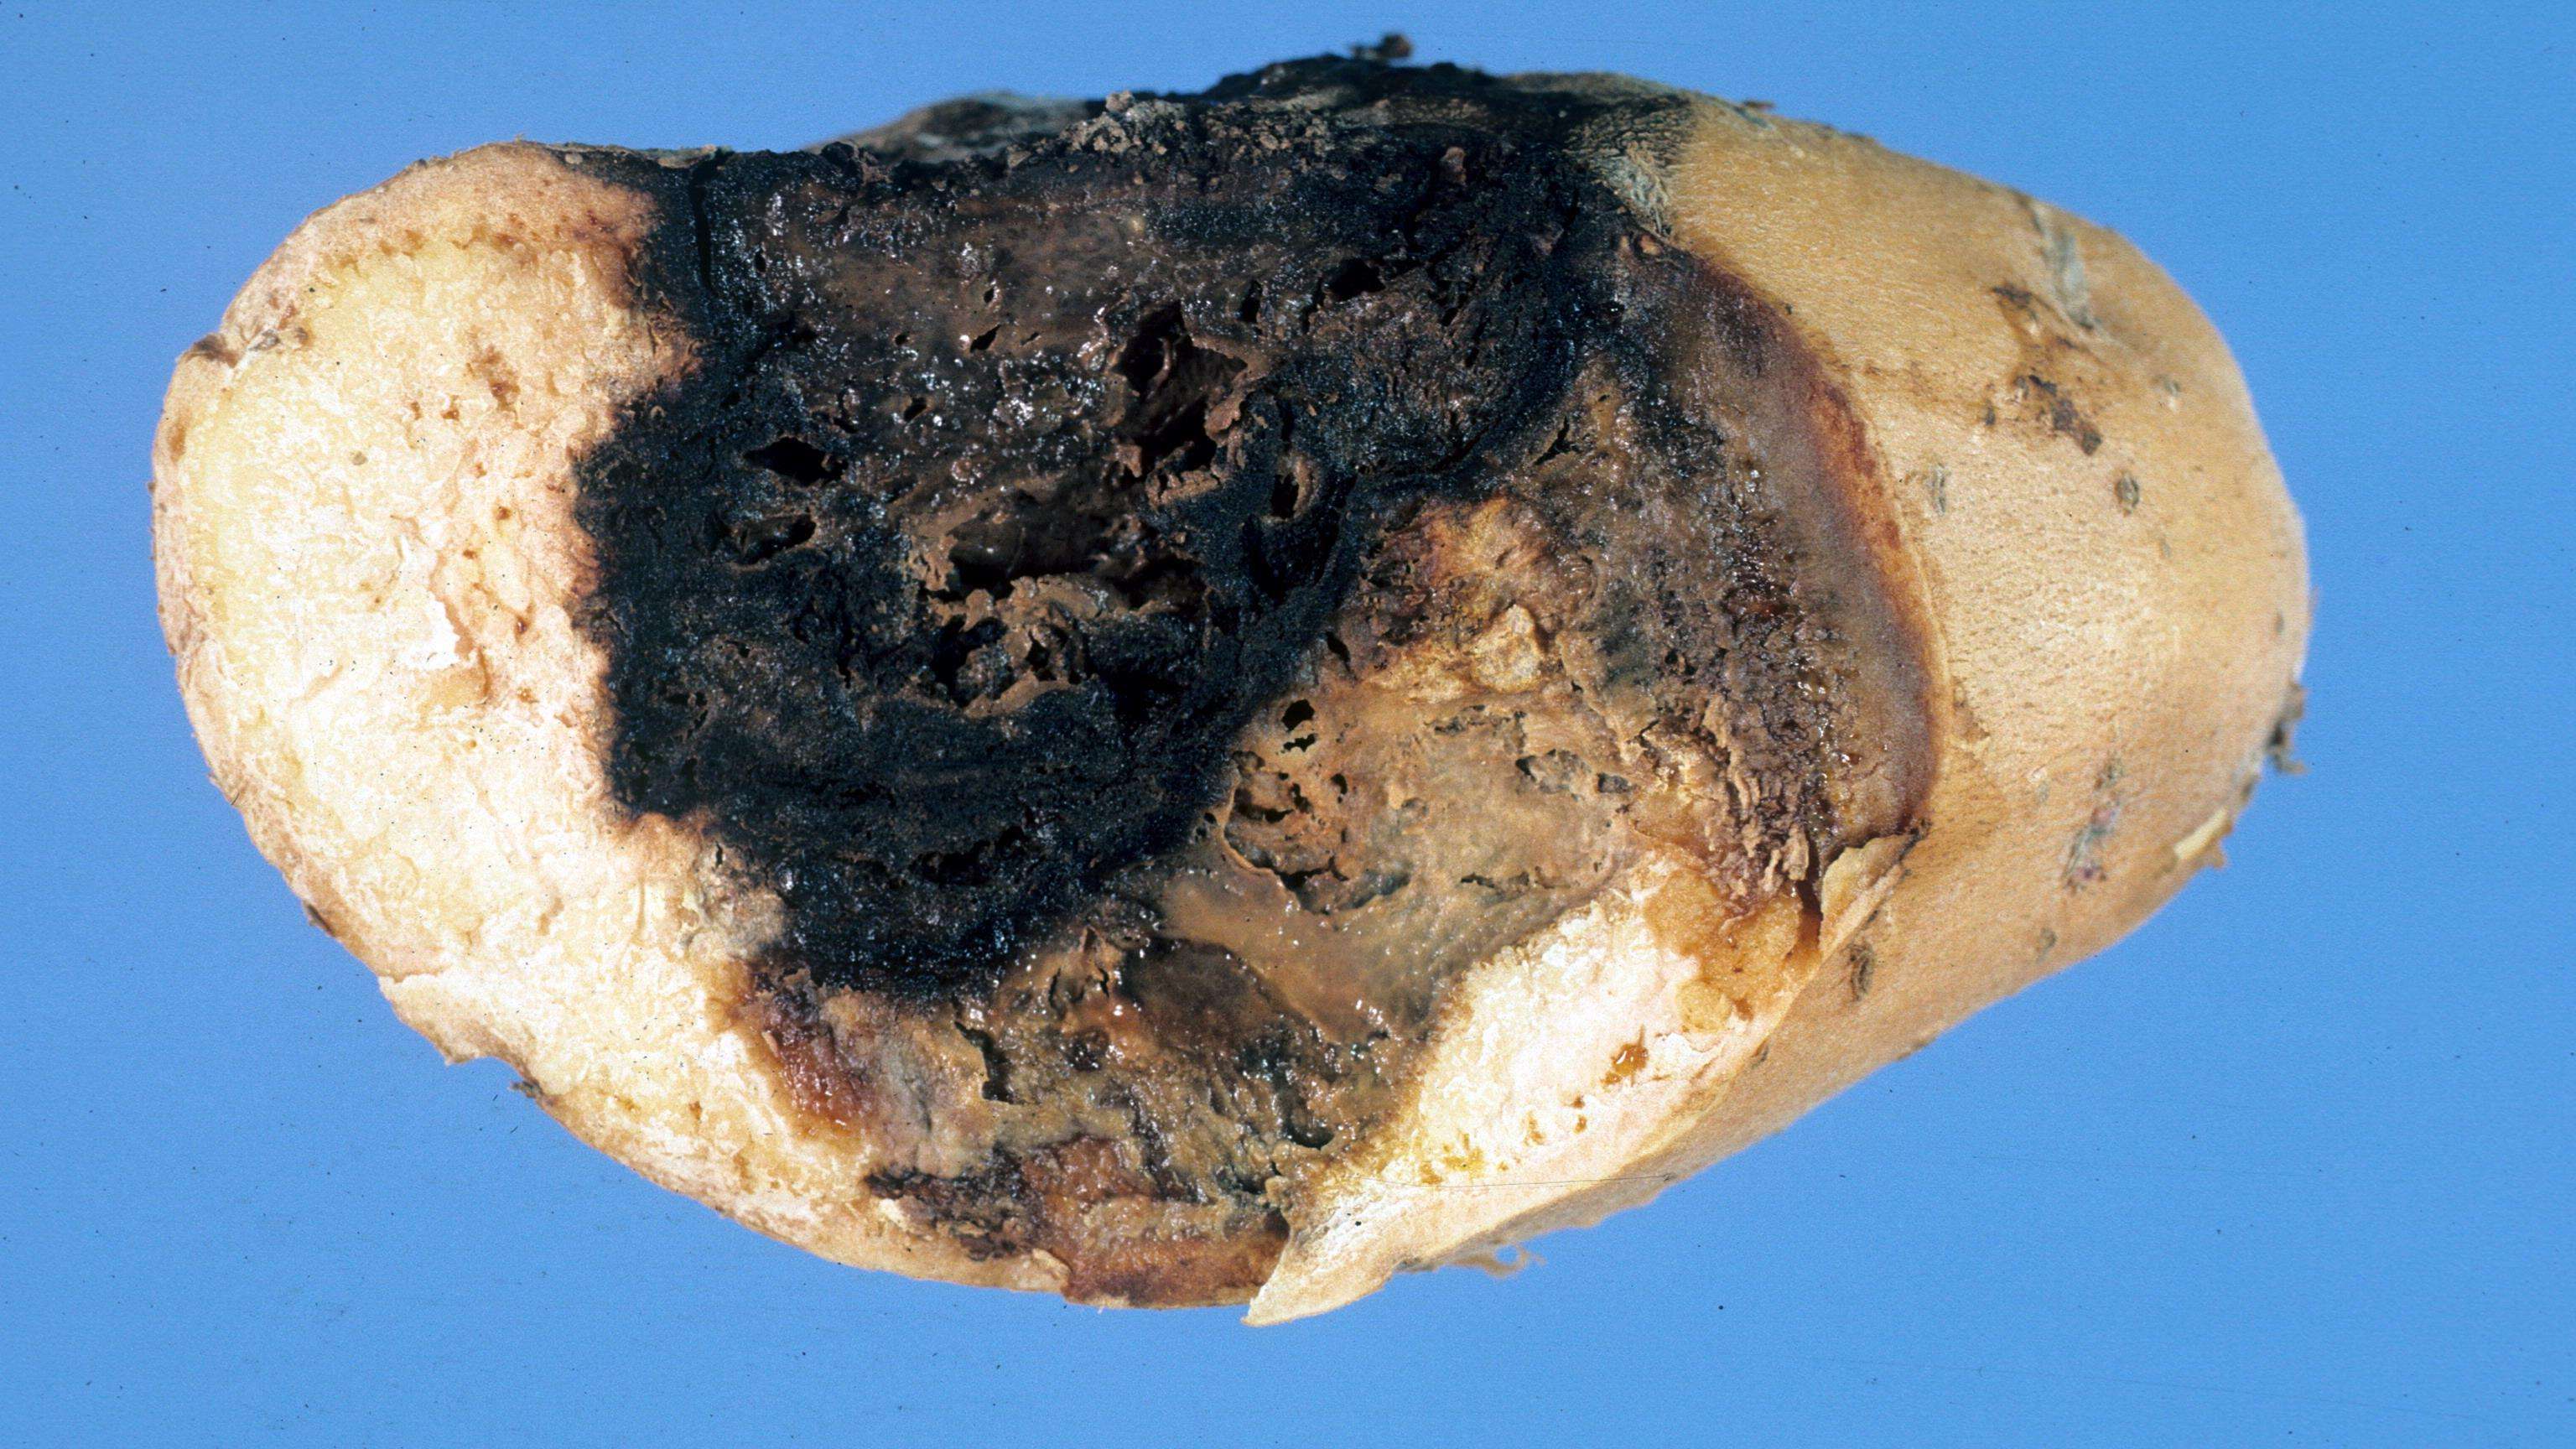 Potato tuber cut open to show areas of black and brown rot in the tuber flesh caused by Dickeya chrysanthemi.